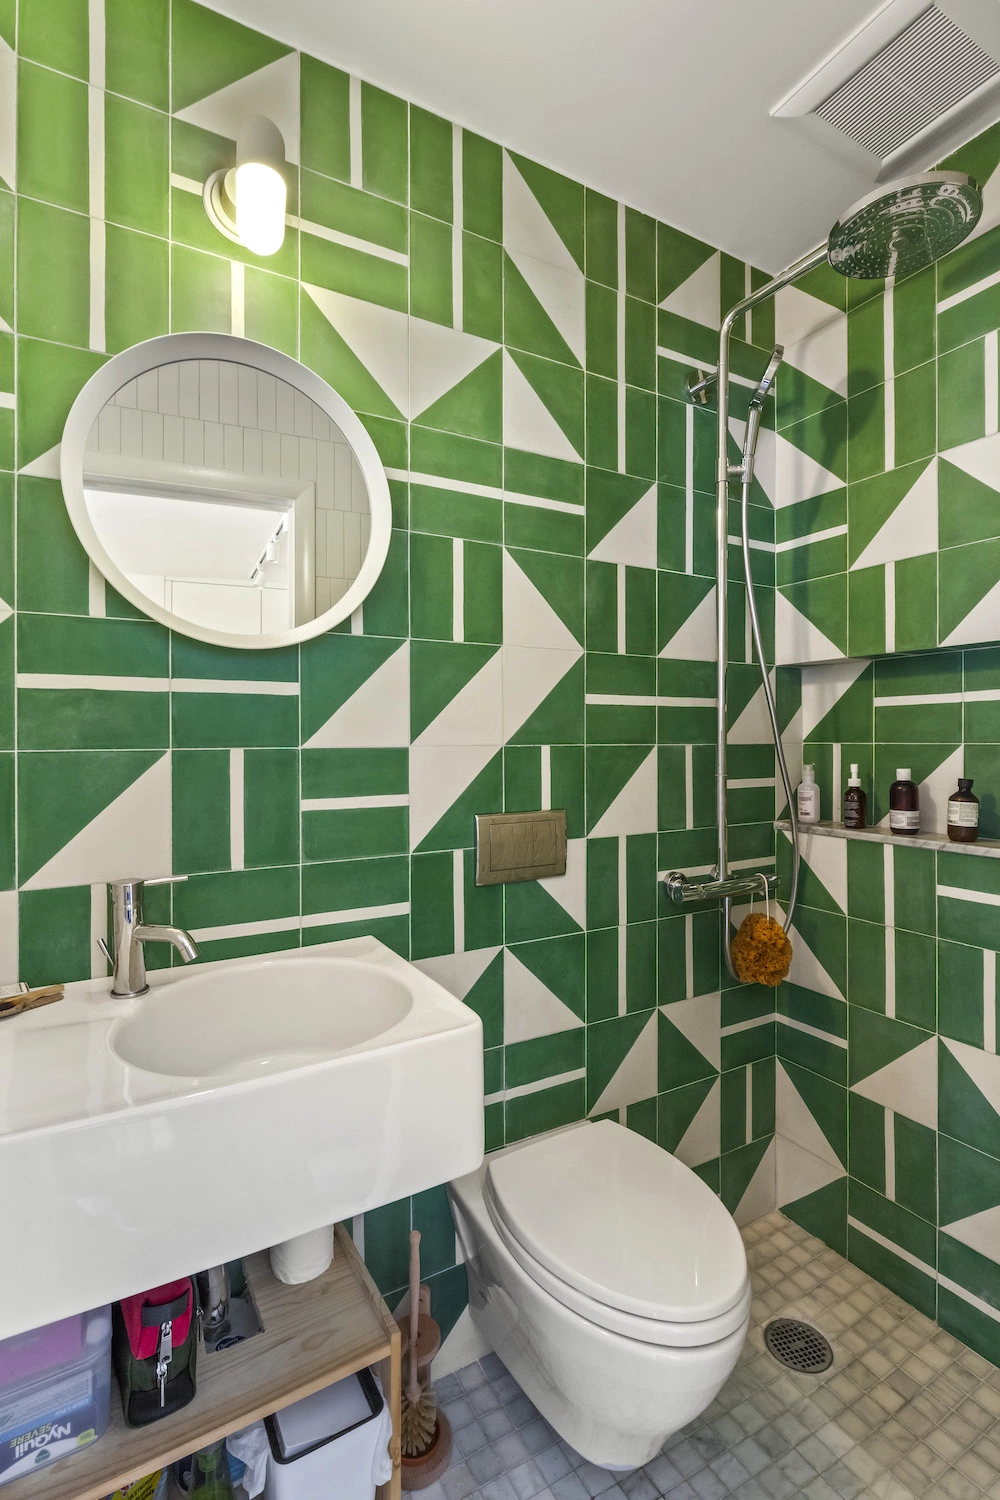 Wet room style bathroom with green tile